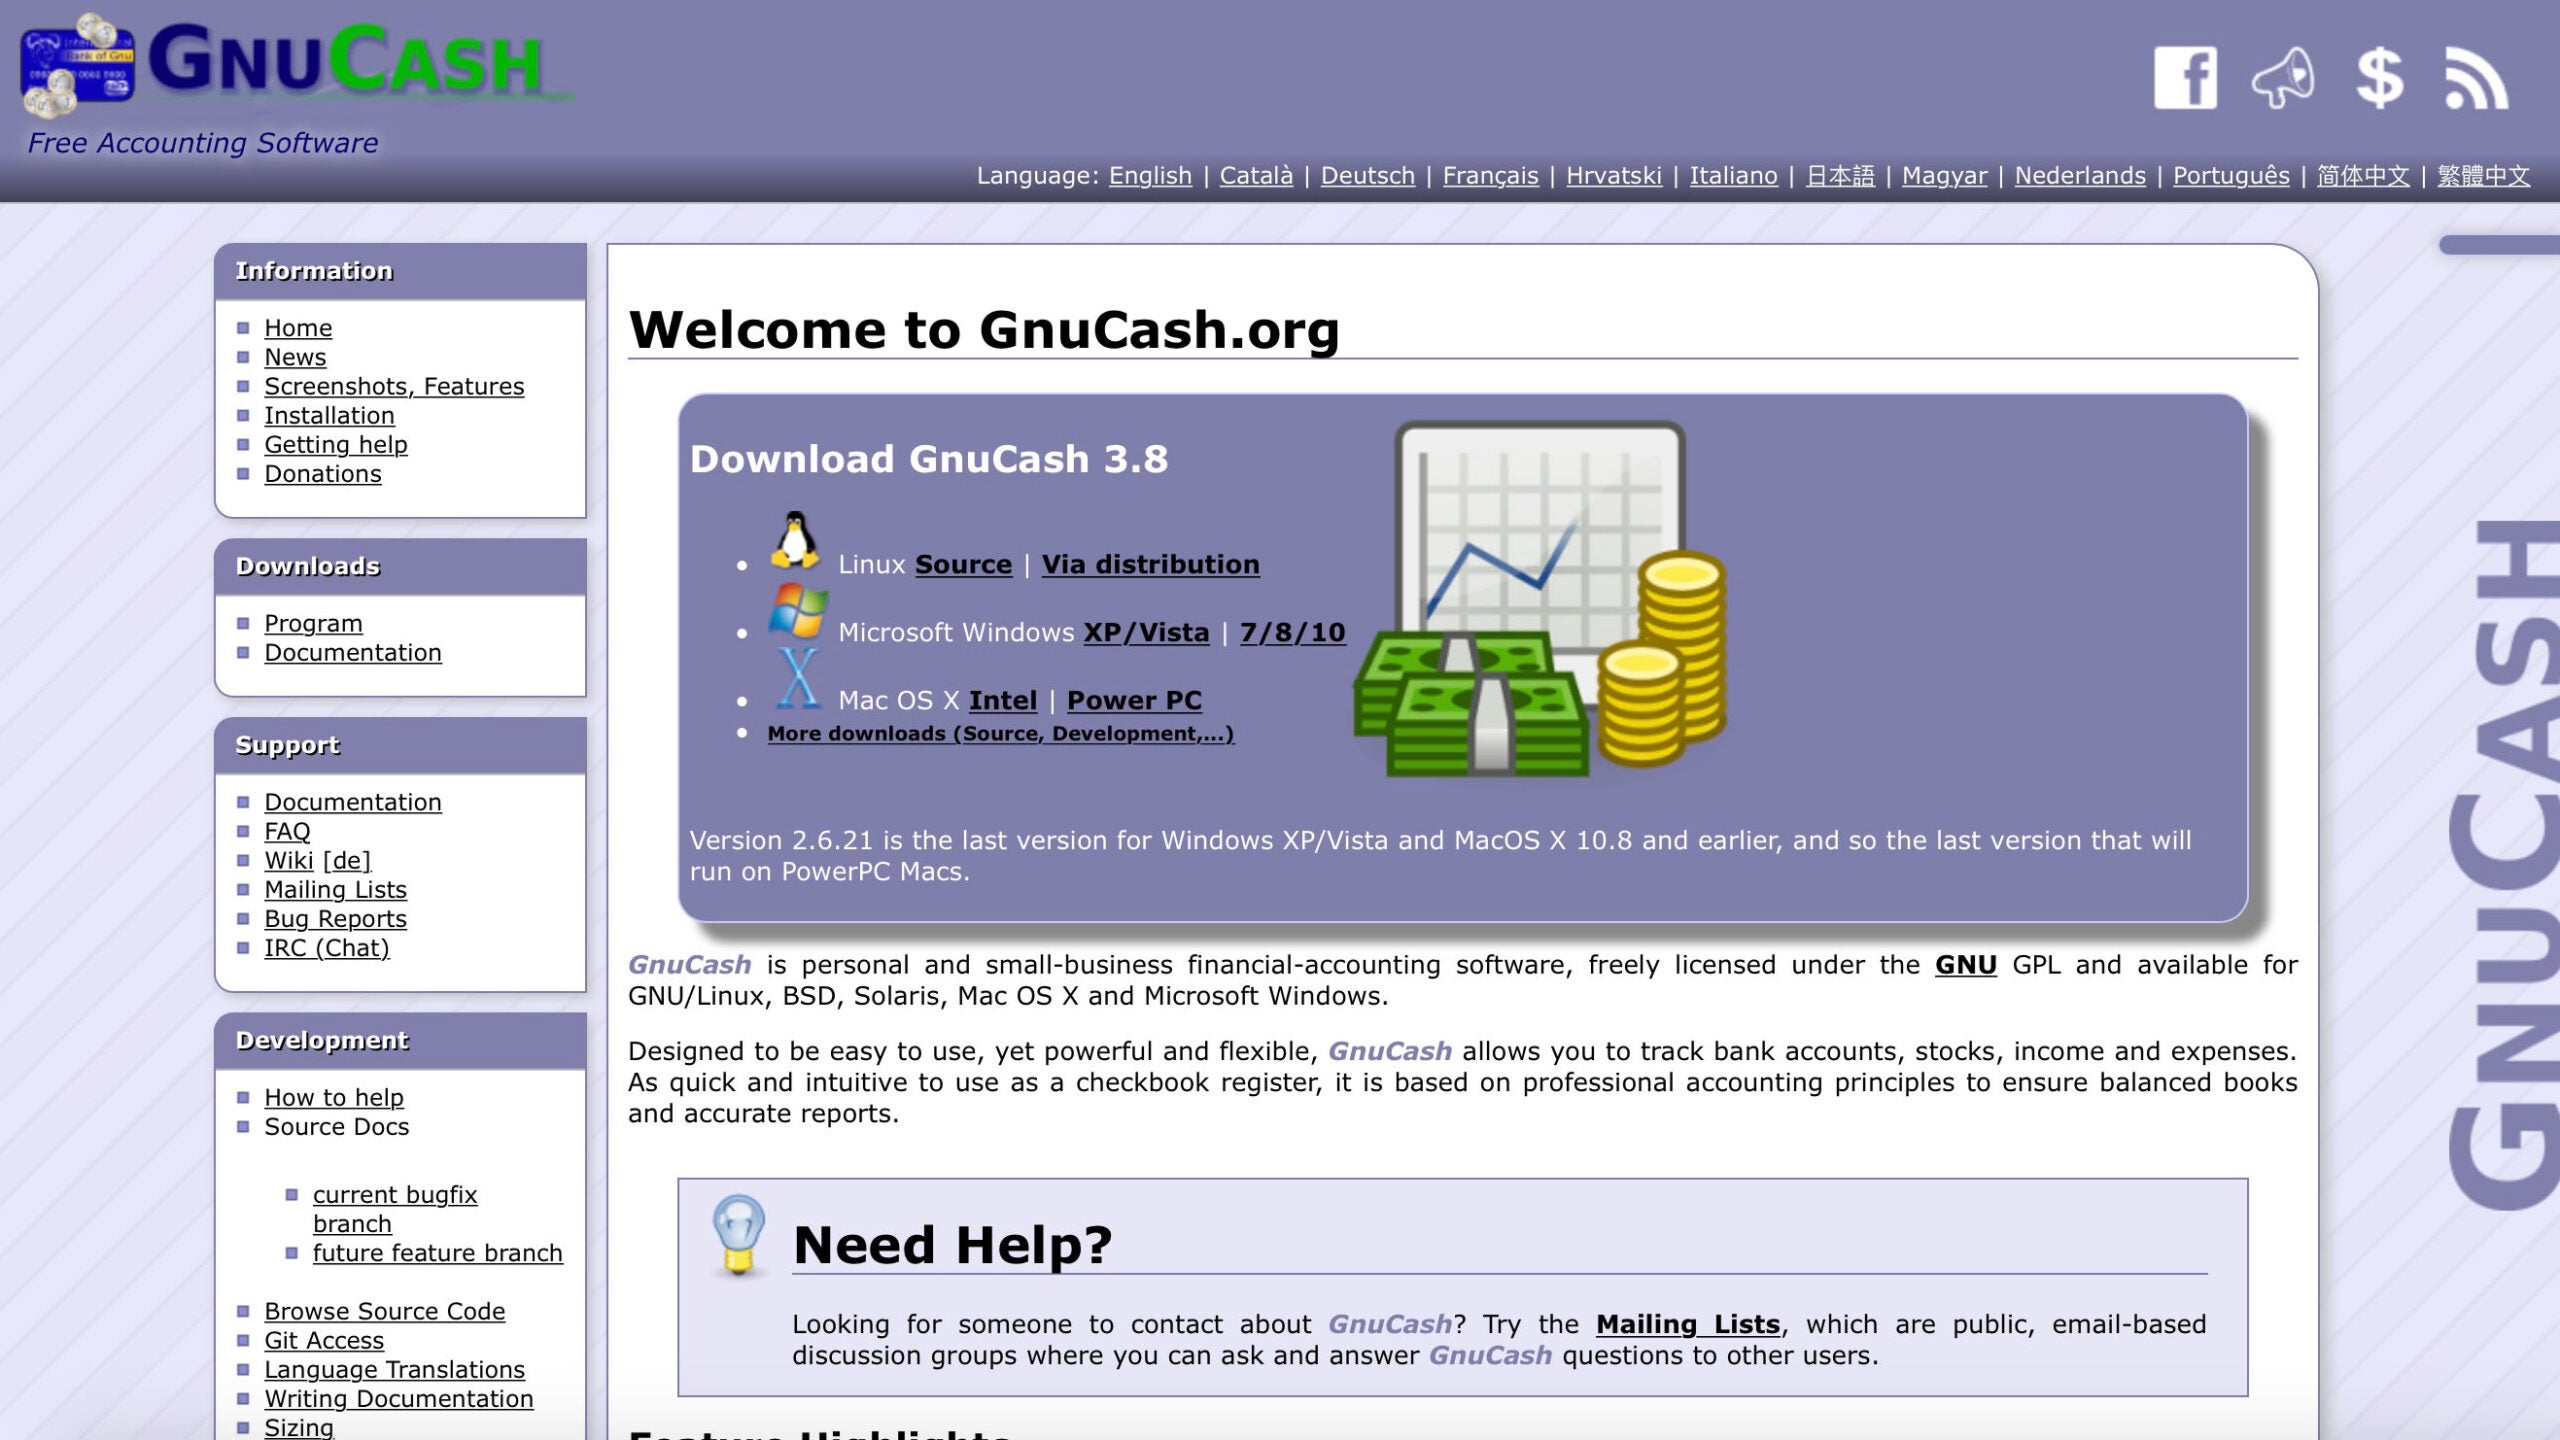 Welcome to GnuCash